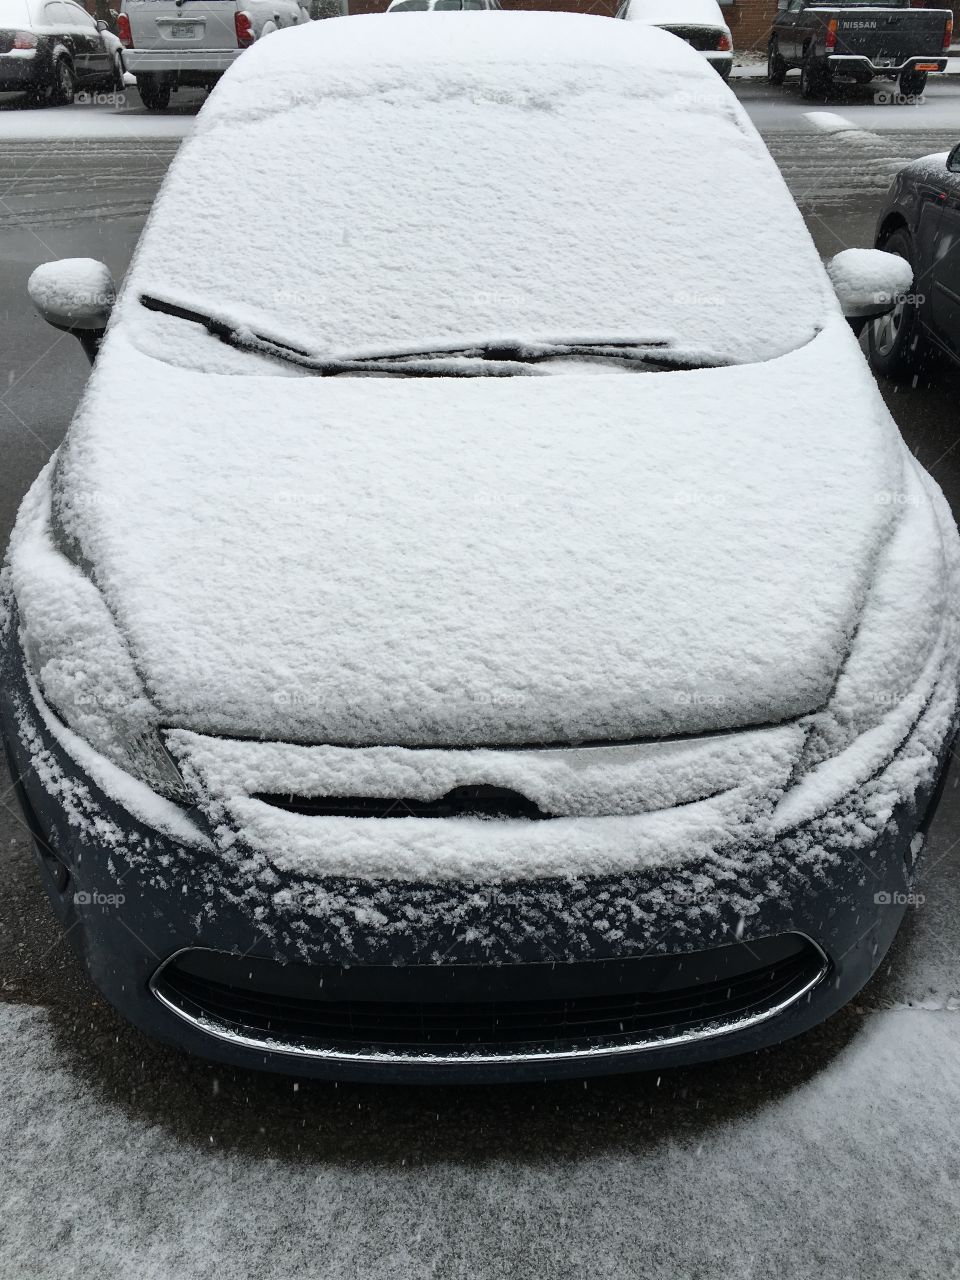 Snow covered car.